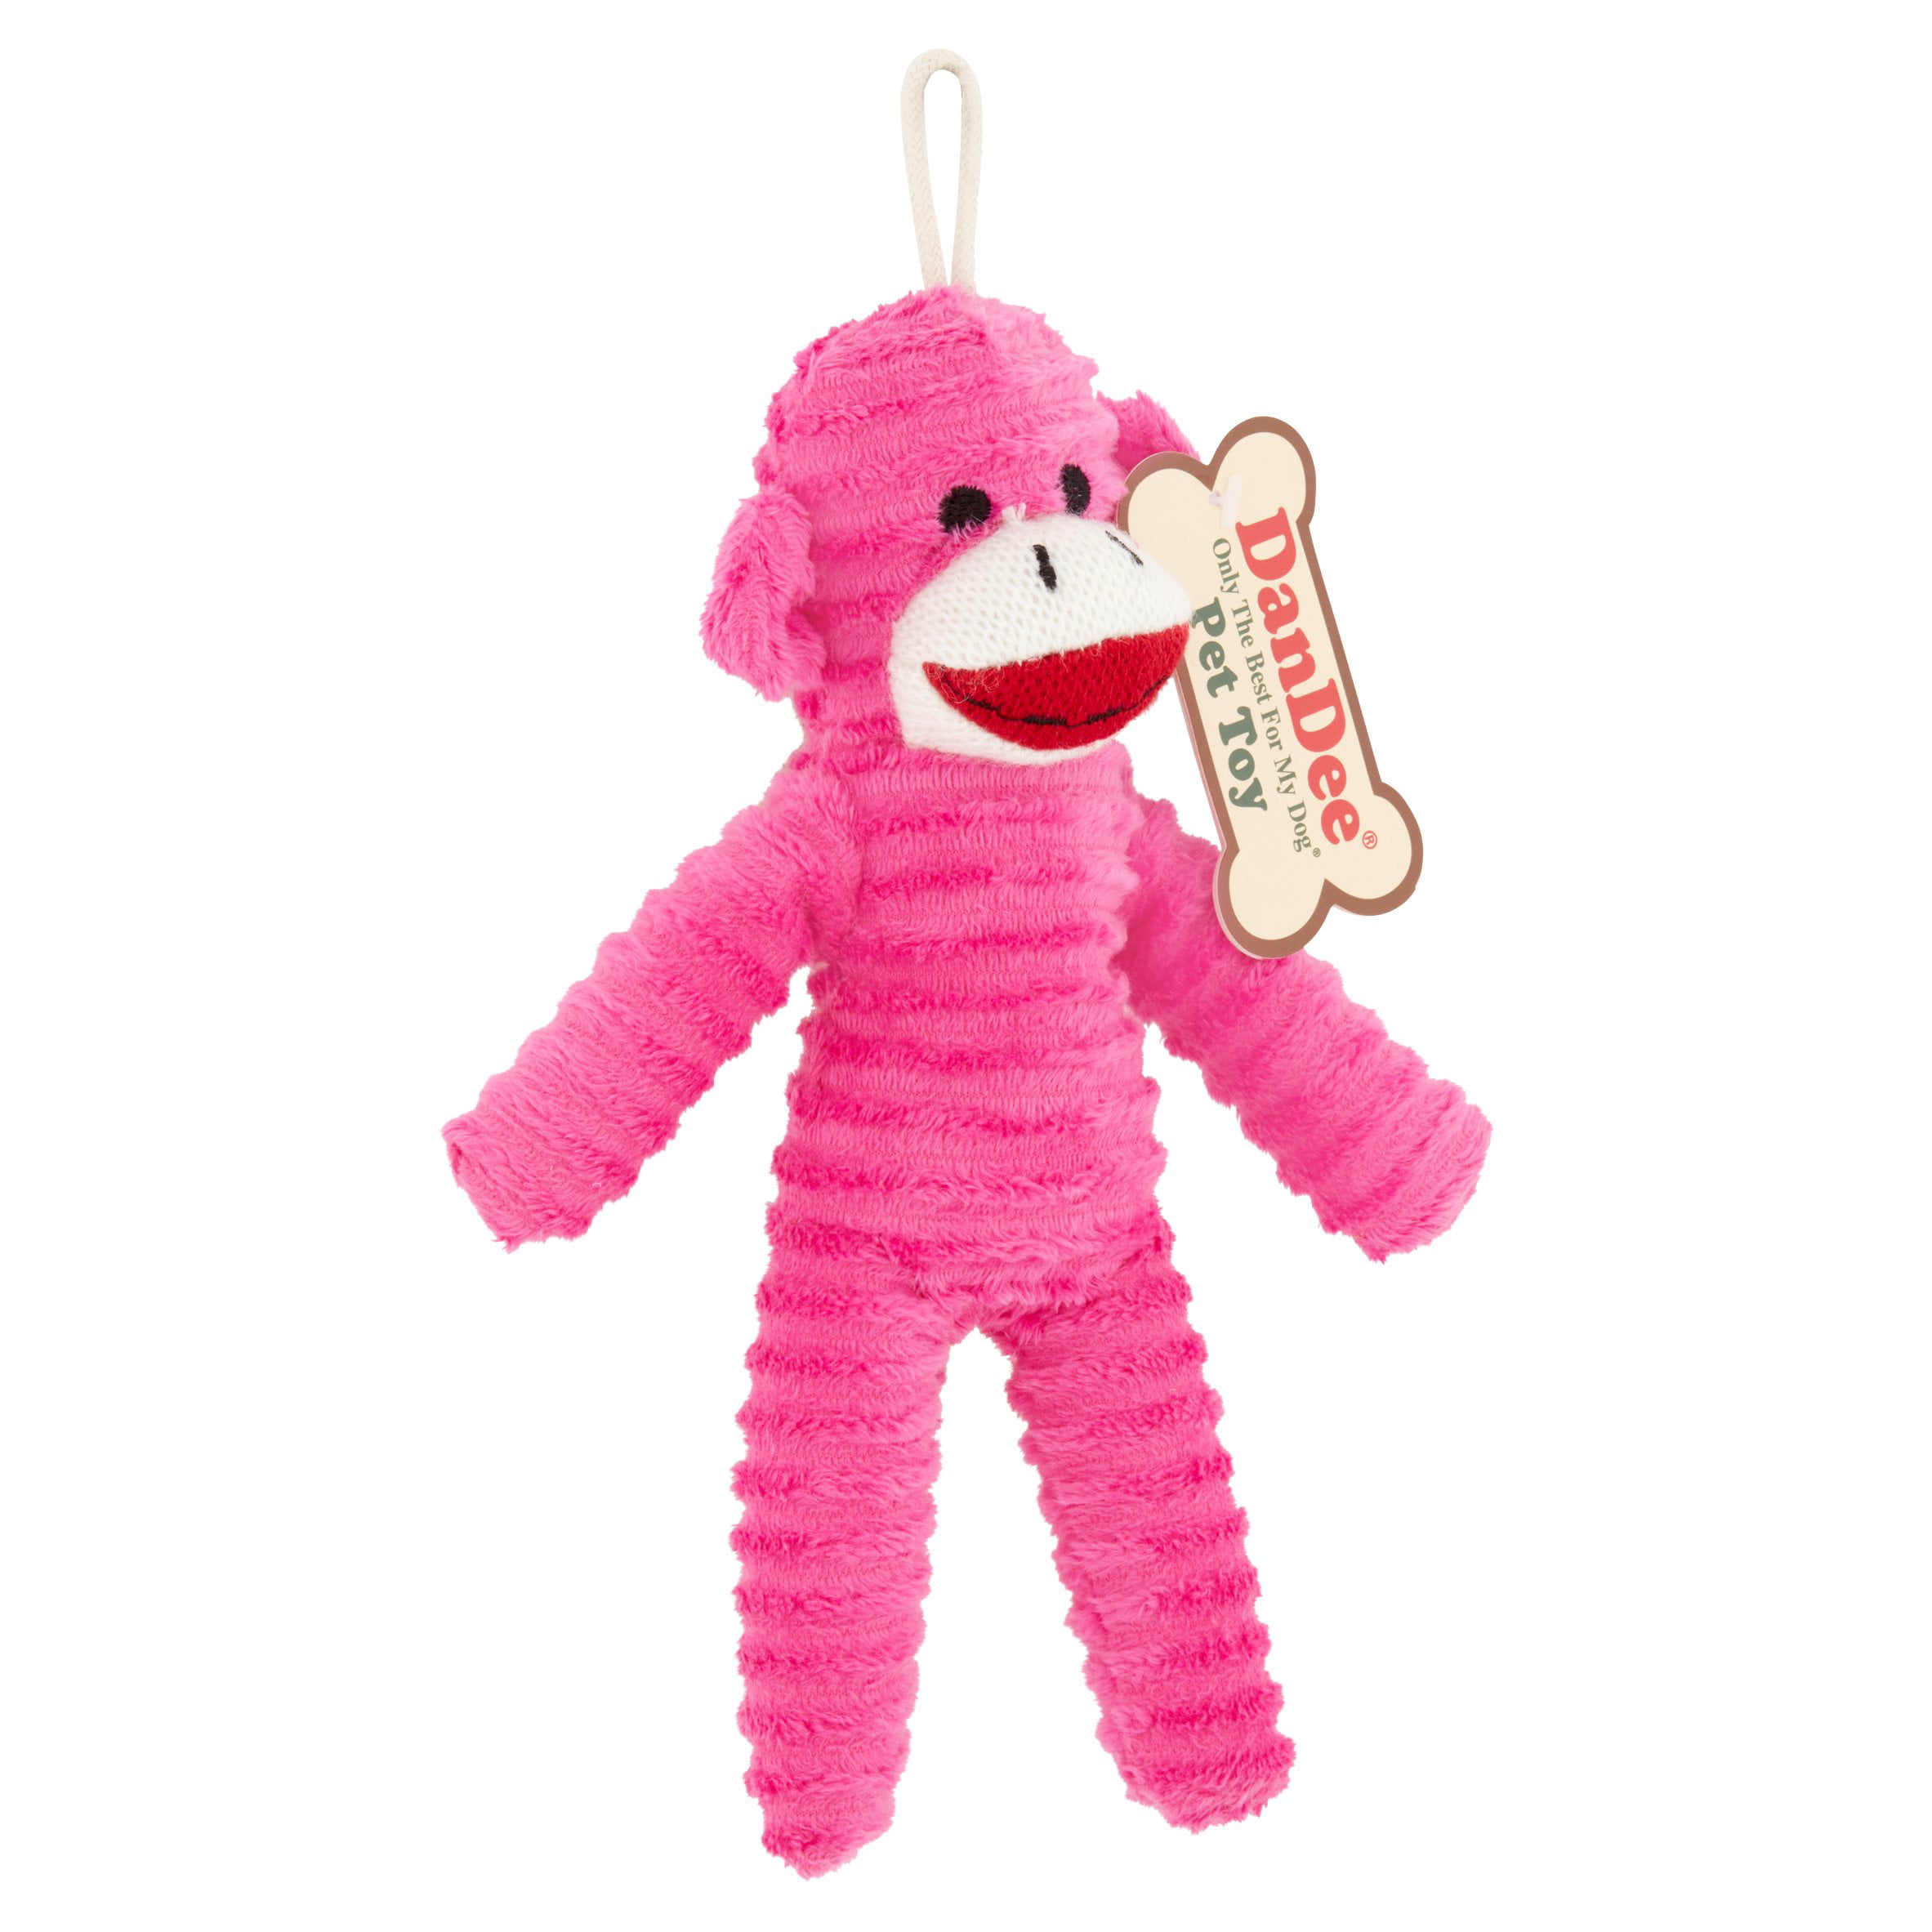 Dan Dee Easter Bunny Sock Monkey Stuffed Pink Camo Shirt12 Inches Tall for sale online 